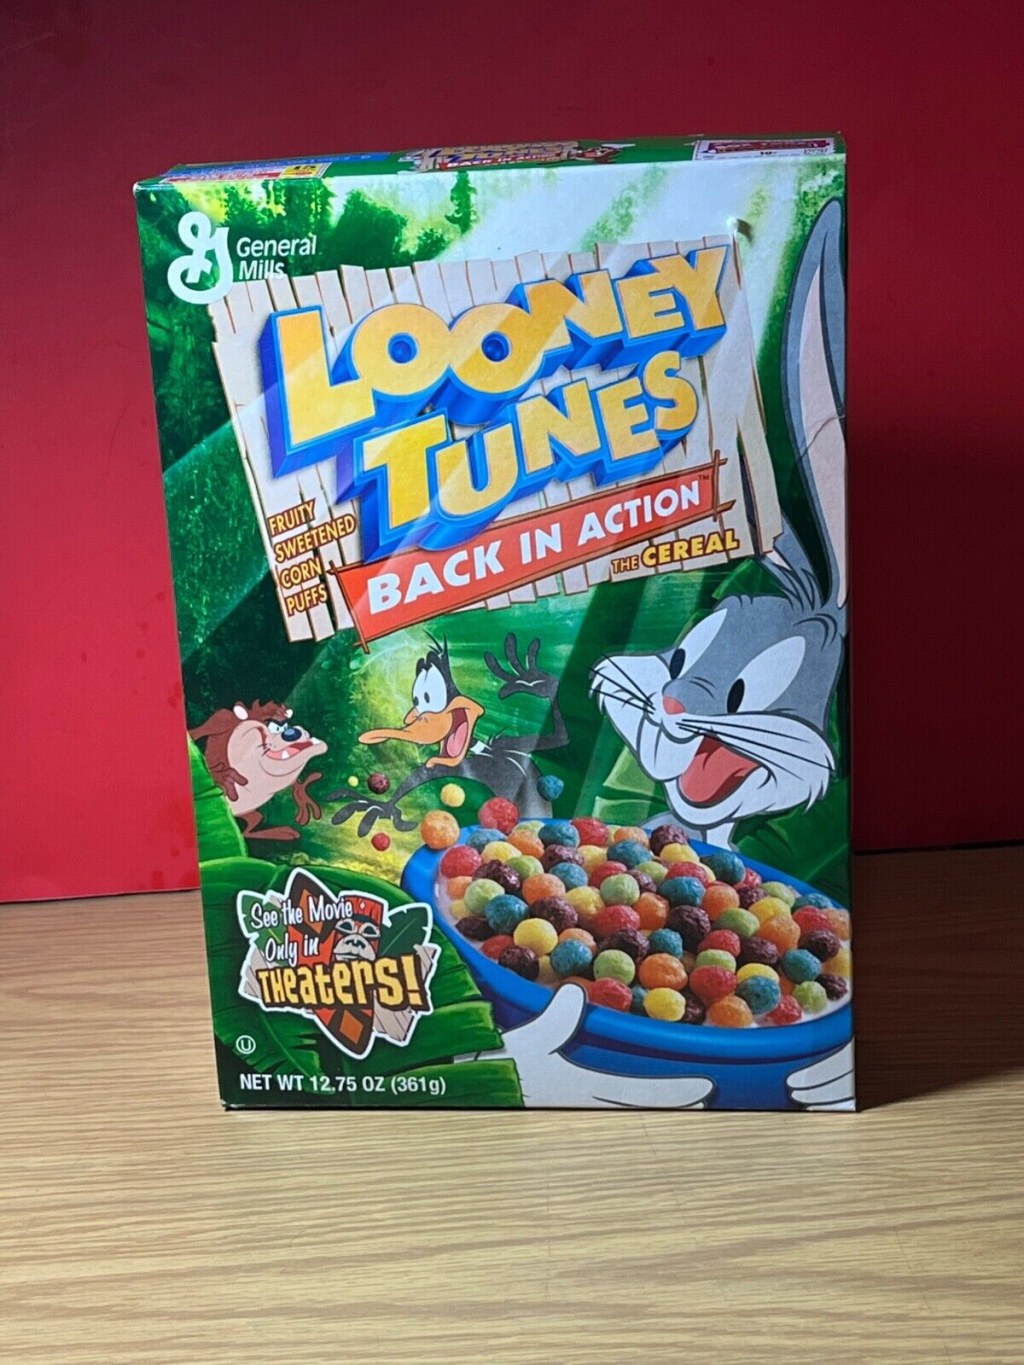 Picture of: General Mills Looney Tunes Back In Action Full Cereal Box from